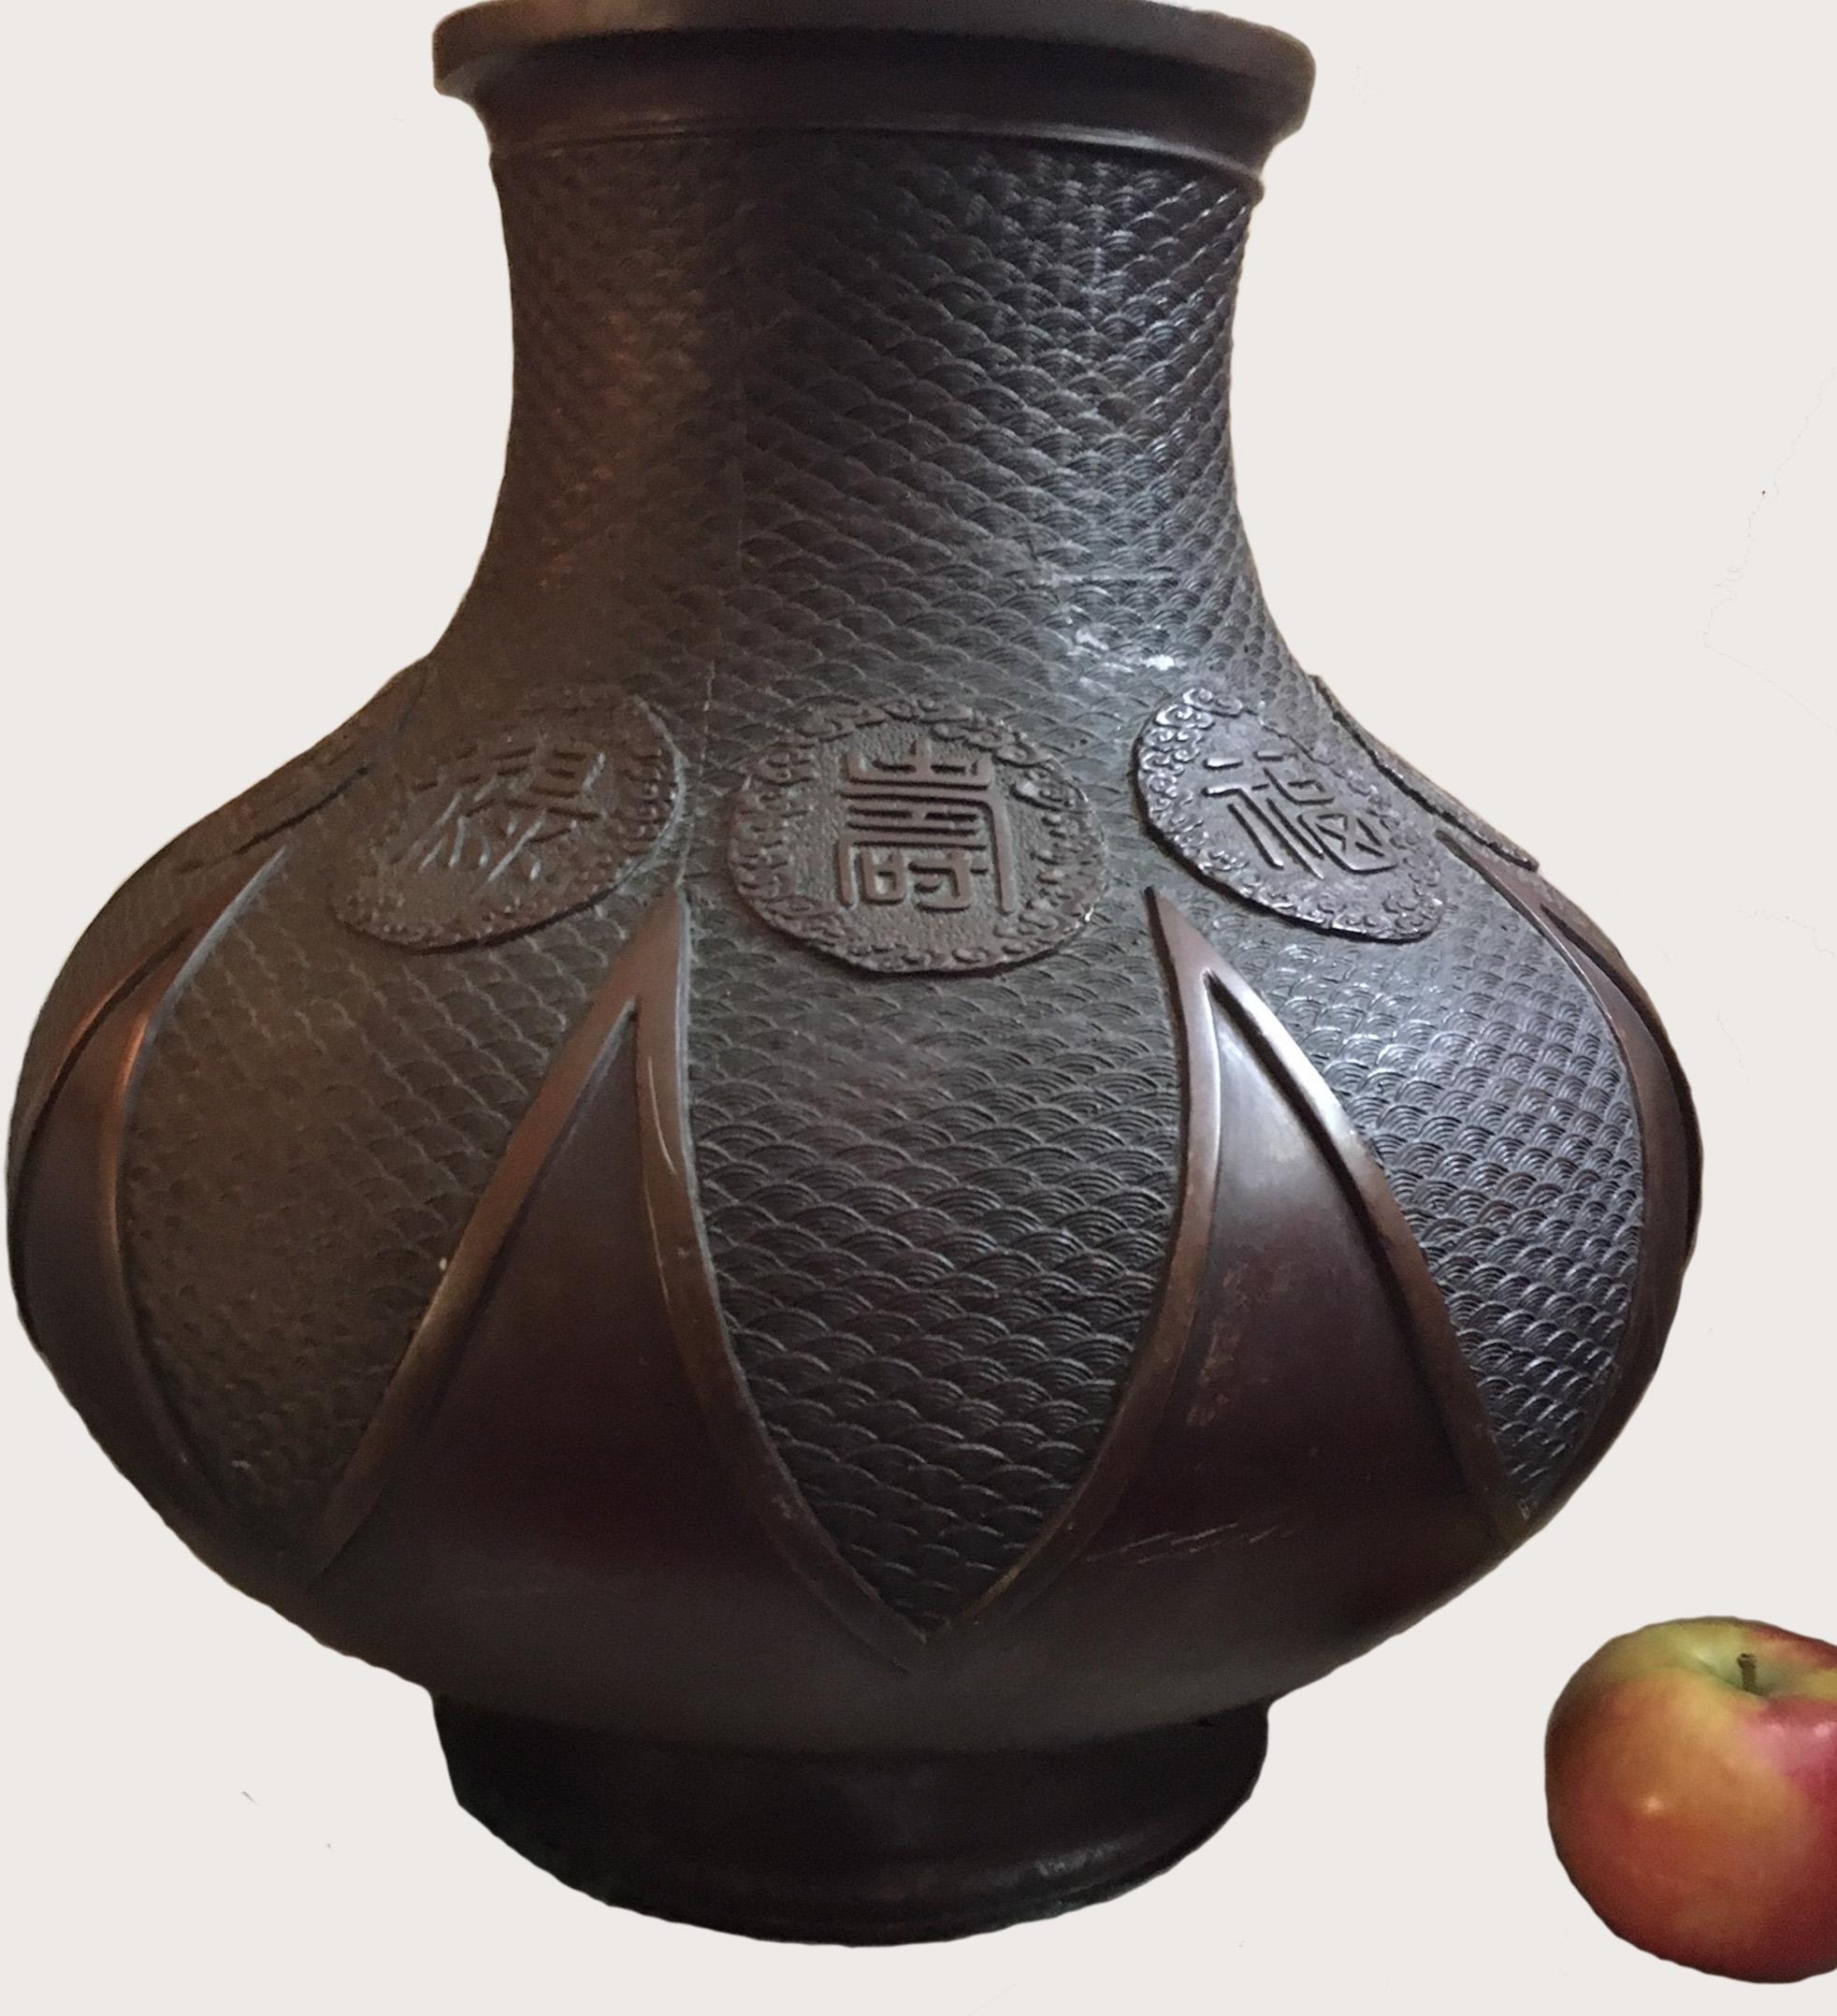 The pear shaped body is rising from the short splayed foot to a waisted neck and flared mouth. The excellent, masterfully casted bronze is decorated with the finest seigaiha pattern. Rich warm brown patina completes the beauty of this Chinese style